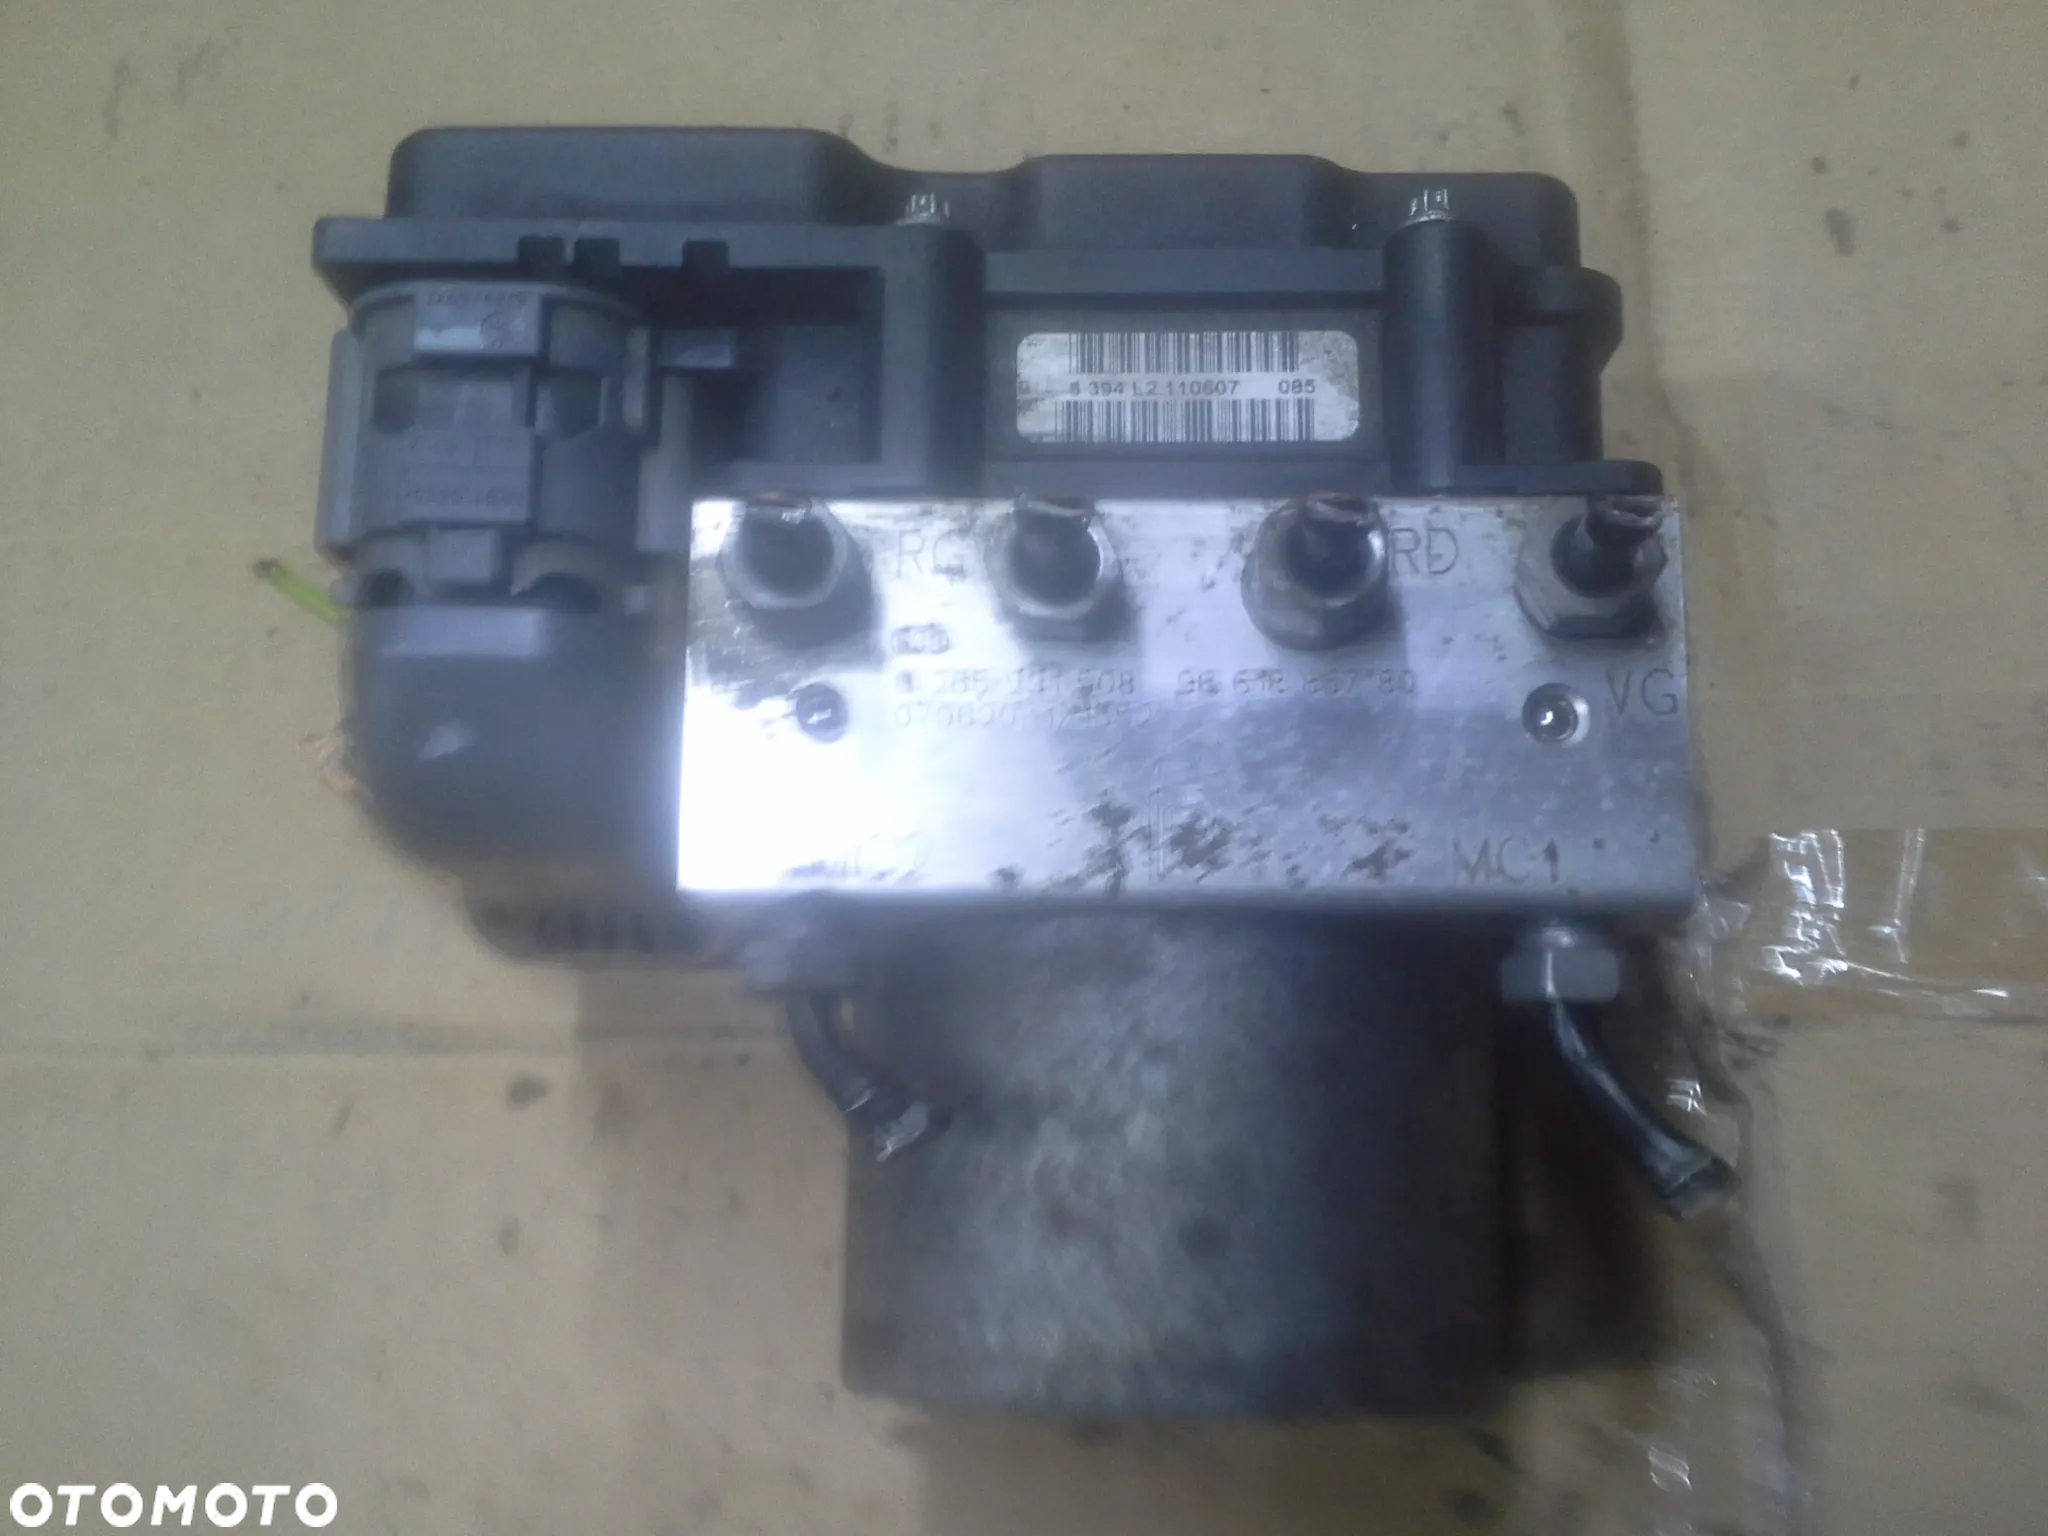 Peugeot 307 1.6 HDi pompa abs 9663345480 0265231508 - 6